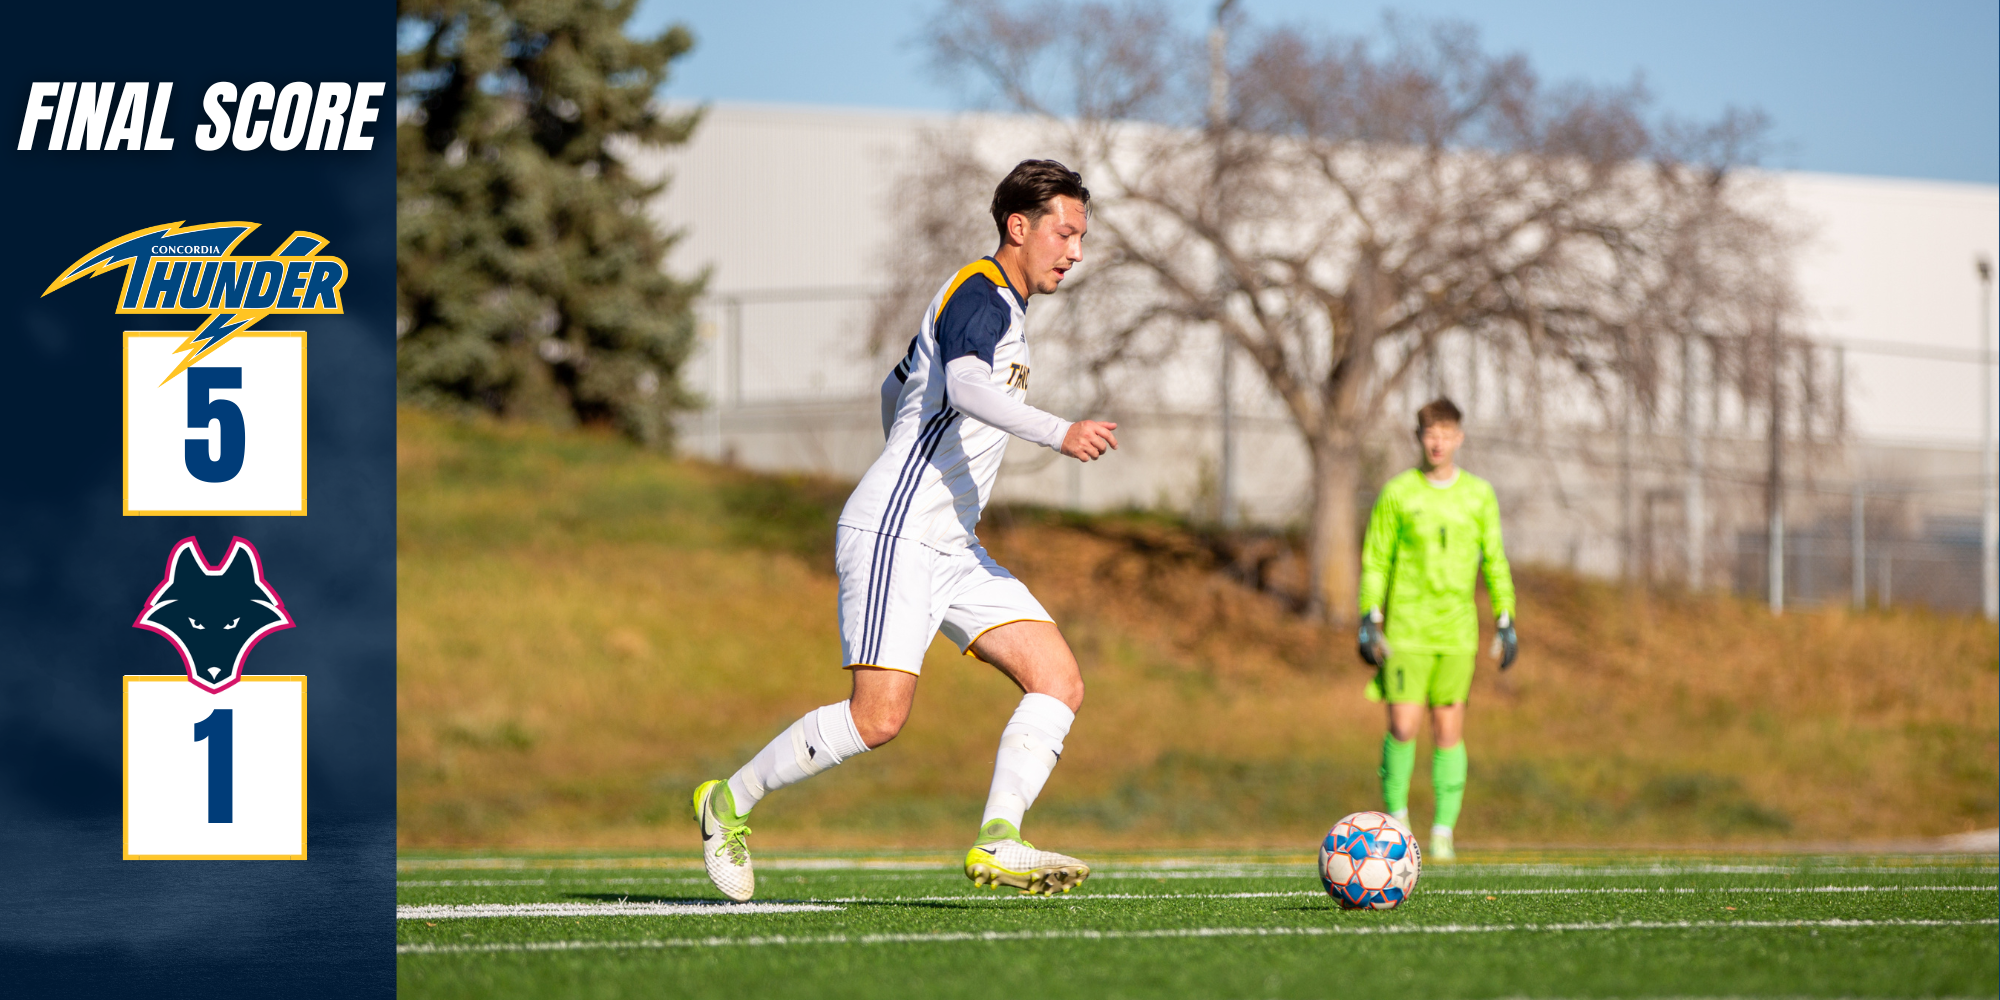 Concordia’s Brilliance Shines: Thunder Soccer Team Overpowers NWP Wolves